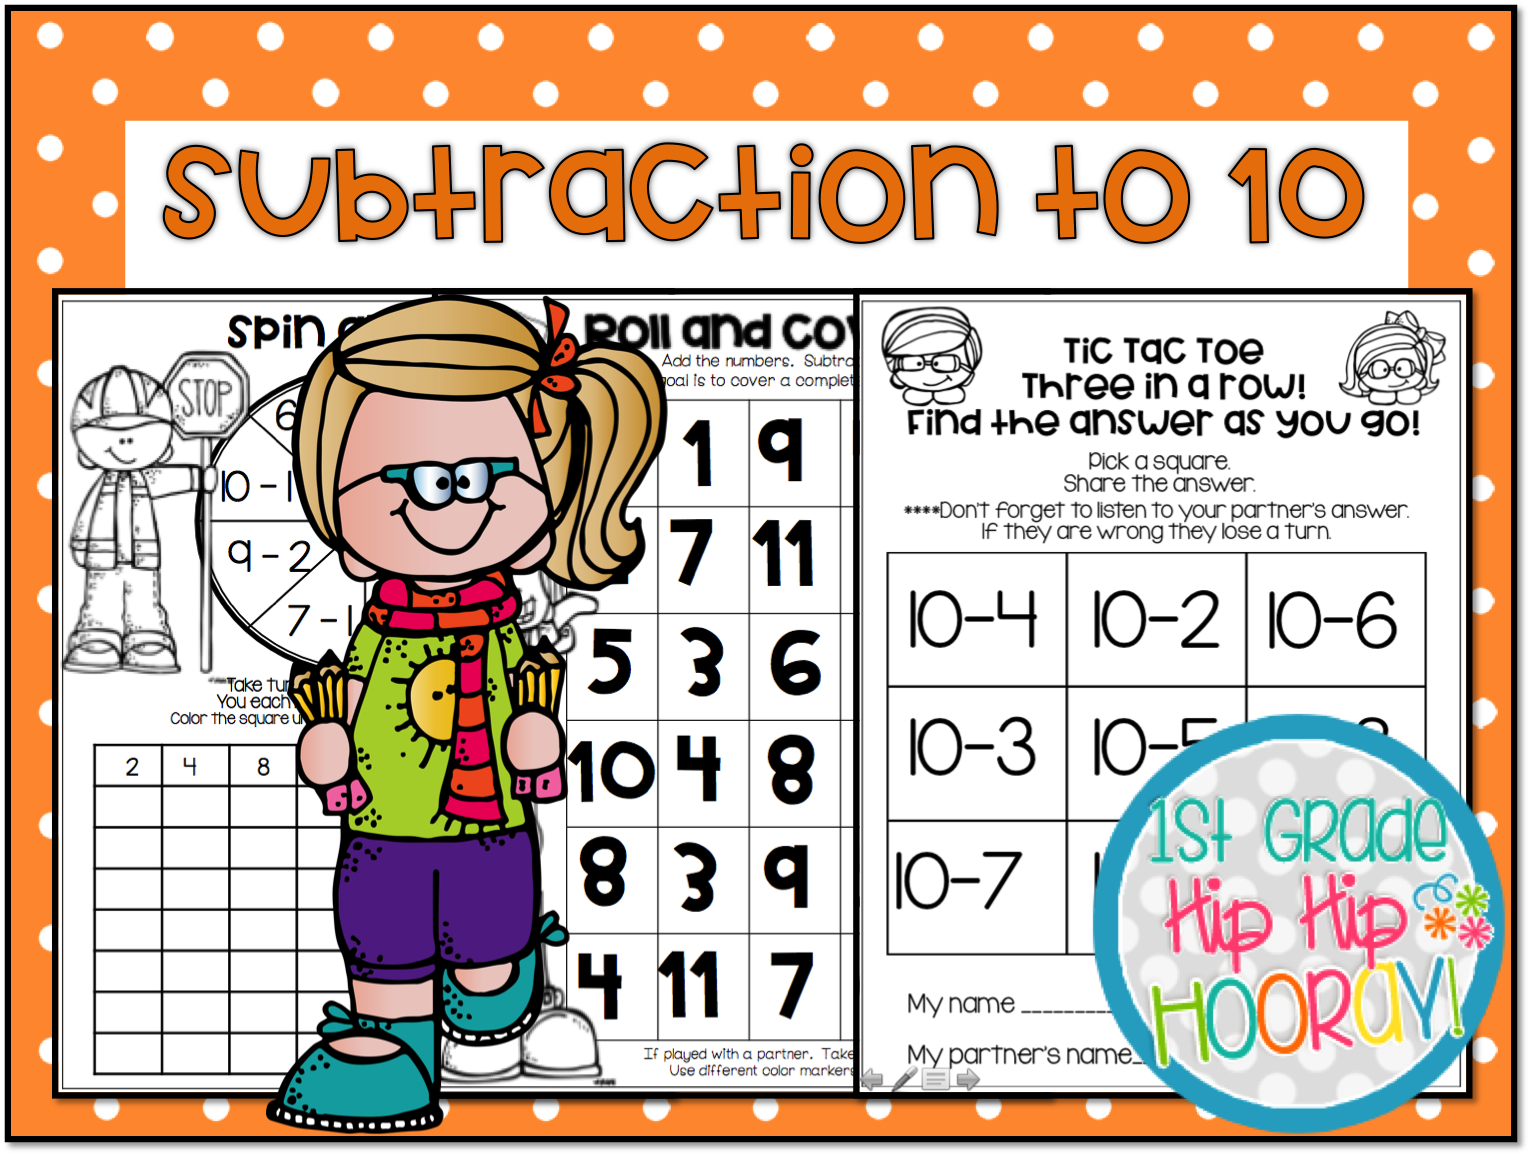 1st Grade Hip Hip Hooray!: Subtraction to 10...Tools and Games to Build